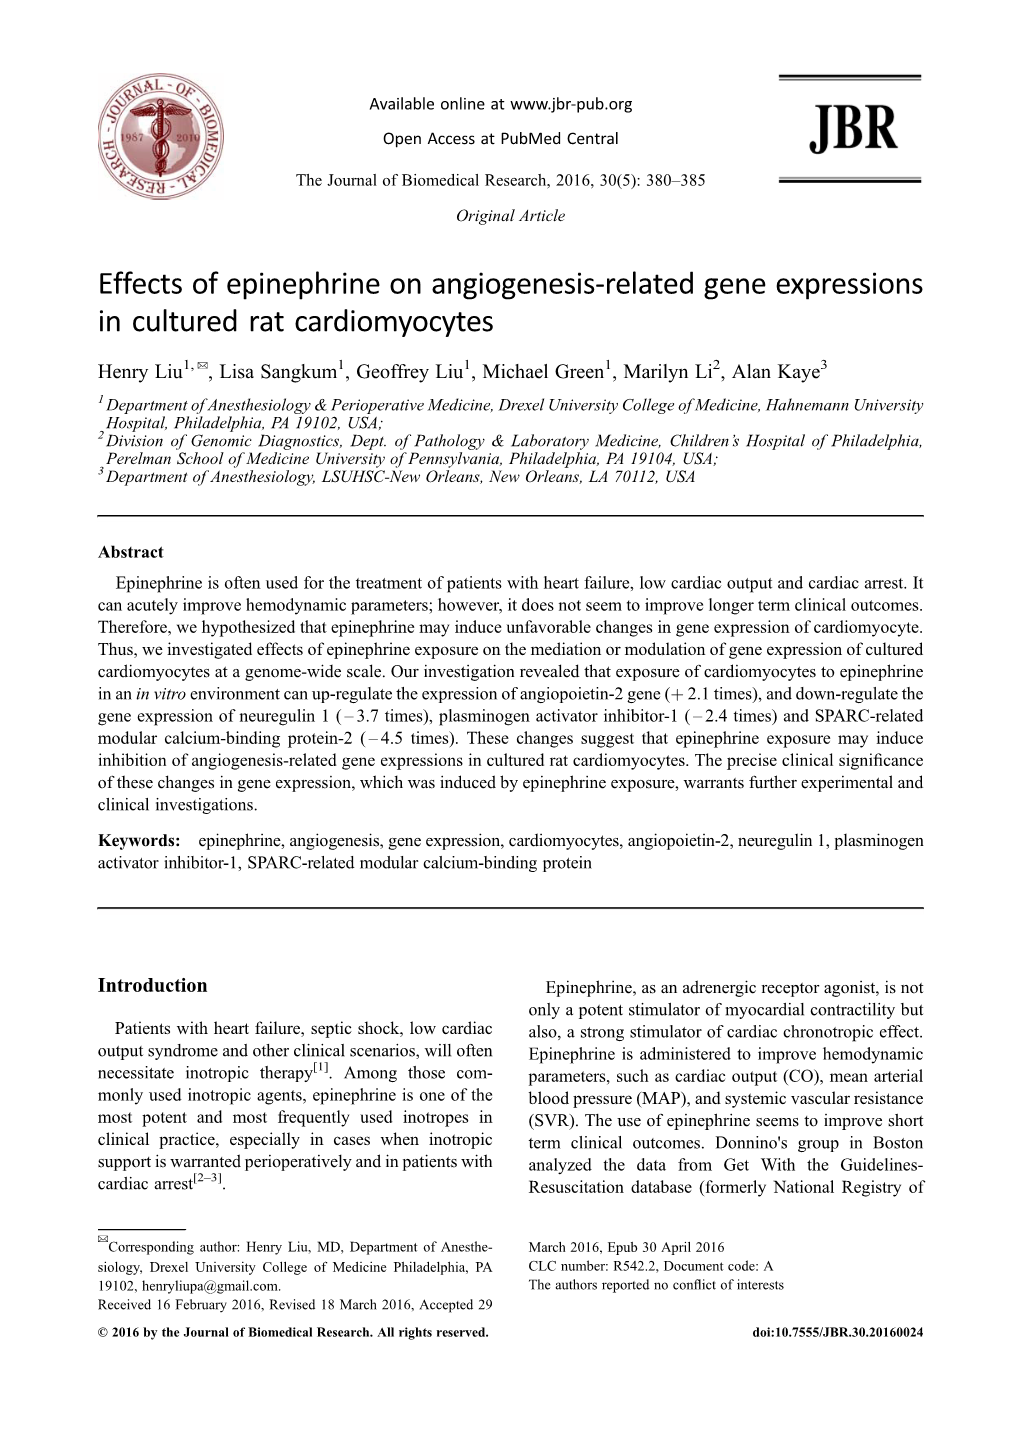 Effects of Epinephrine on Angiogenesis-Related Gene Expressions in Cultured Rat Cardiomyocytes